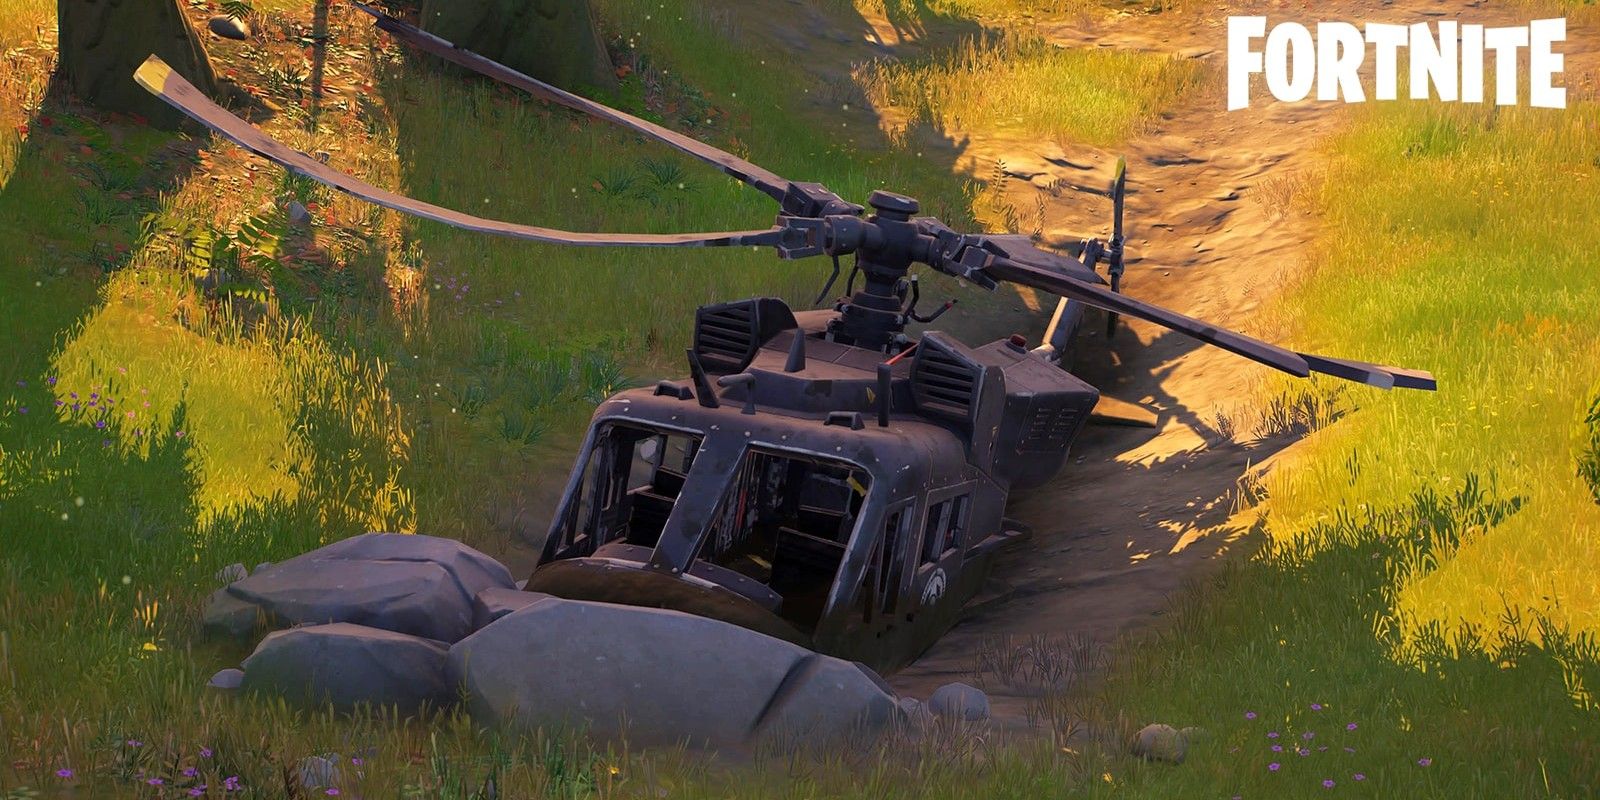 A player finds a downed black helicopter in Fortnite for the Season 6 Foreshadowing Quests